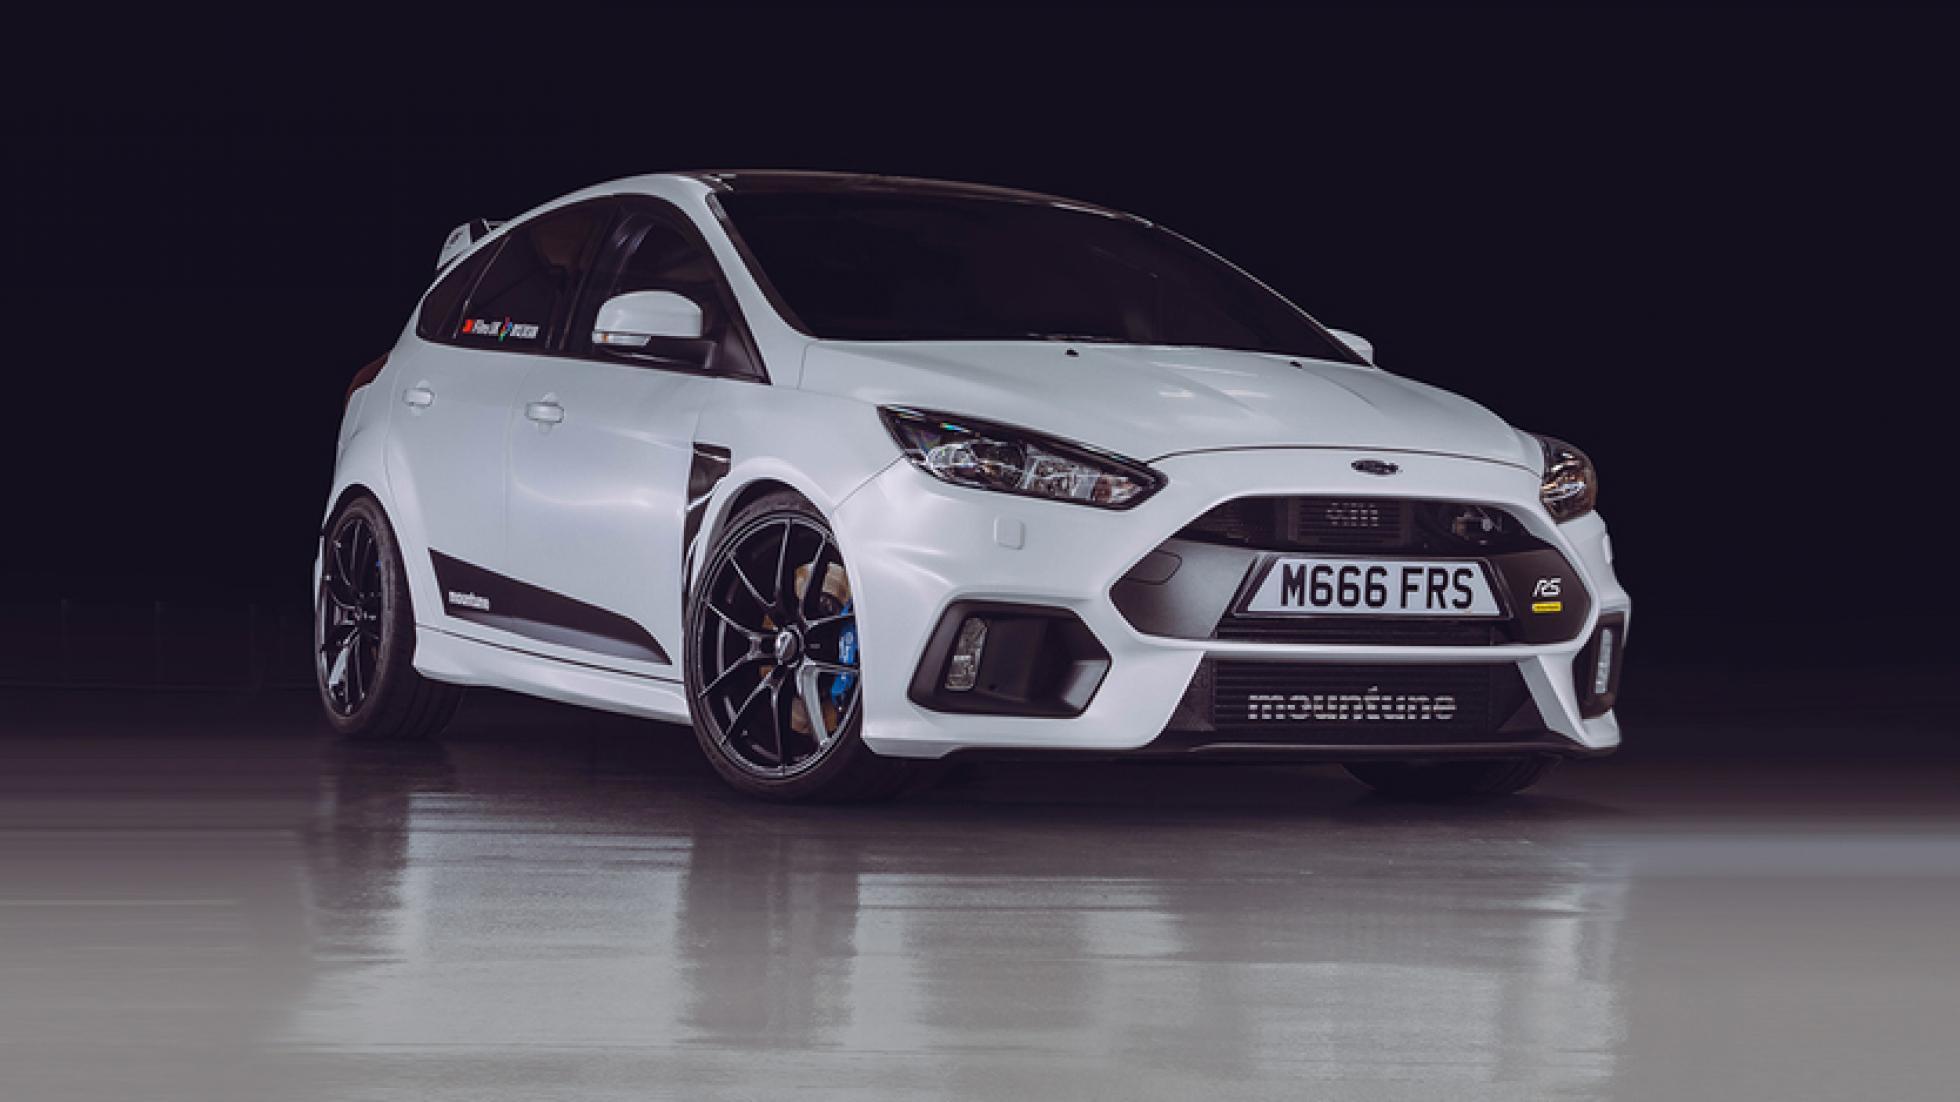 Mountune extracts 684bhp from a Ford Focus RS engine